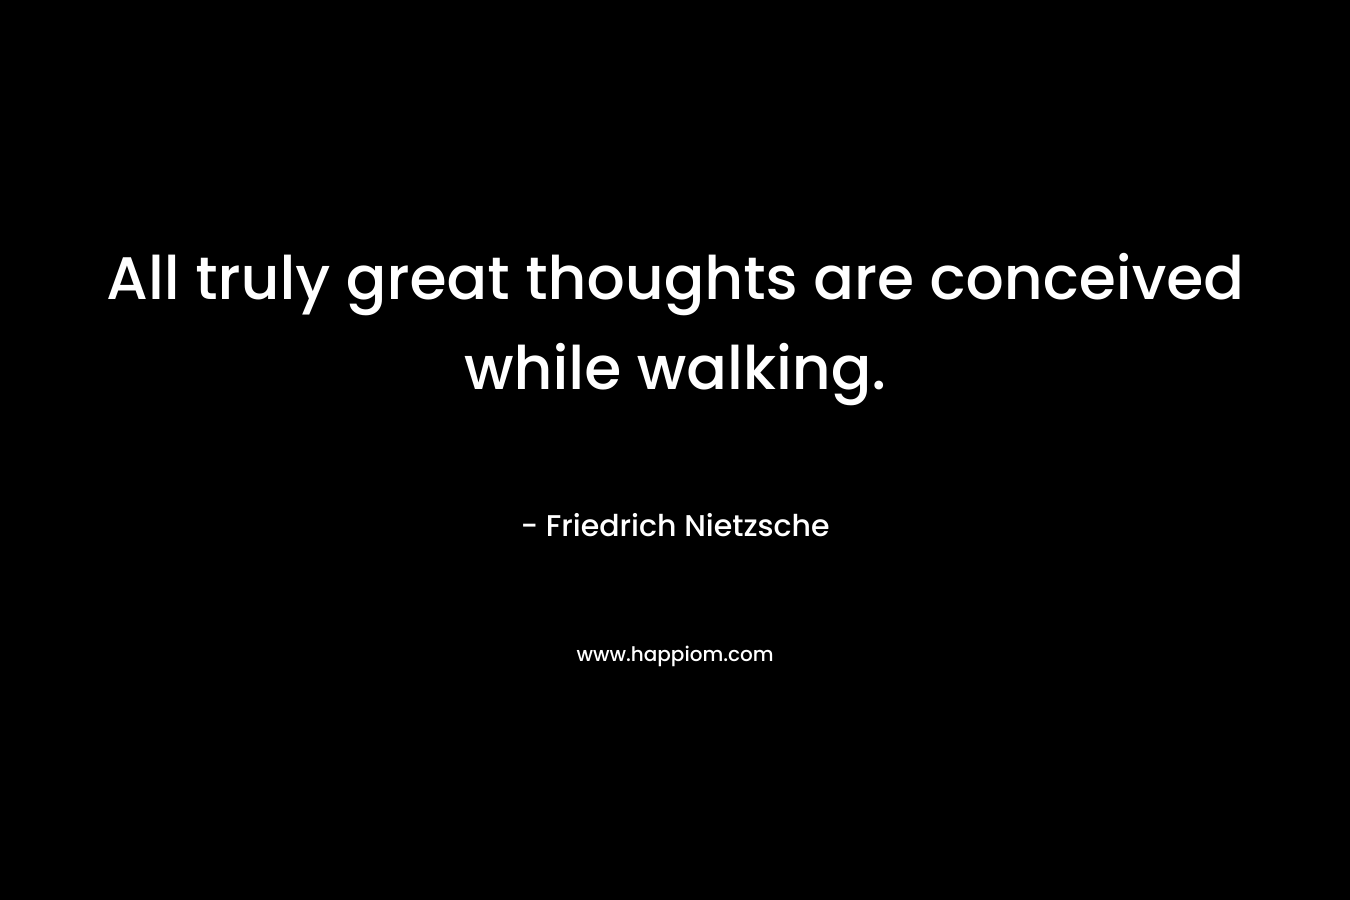 All truly great thoughts are conceived while walking.